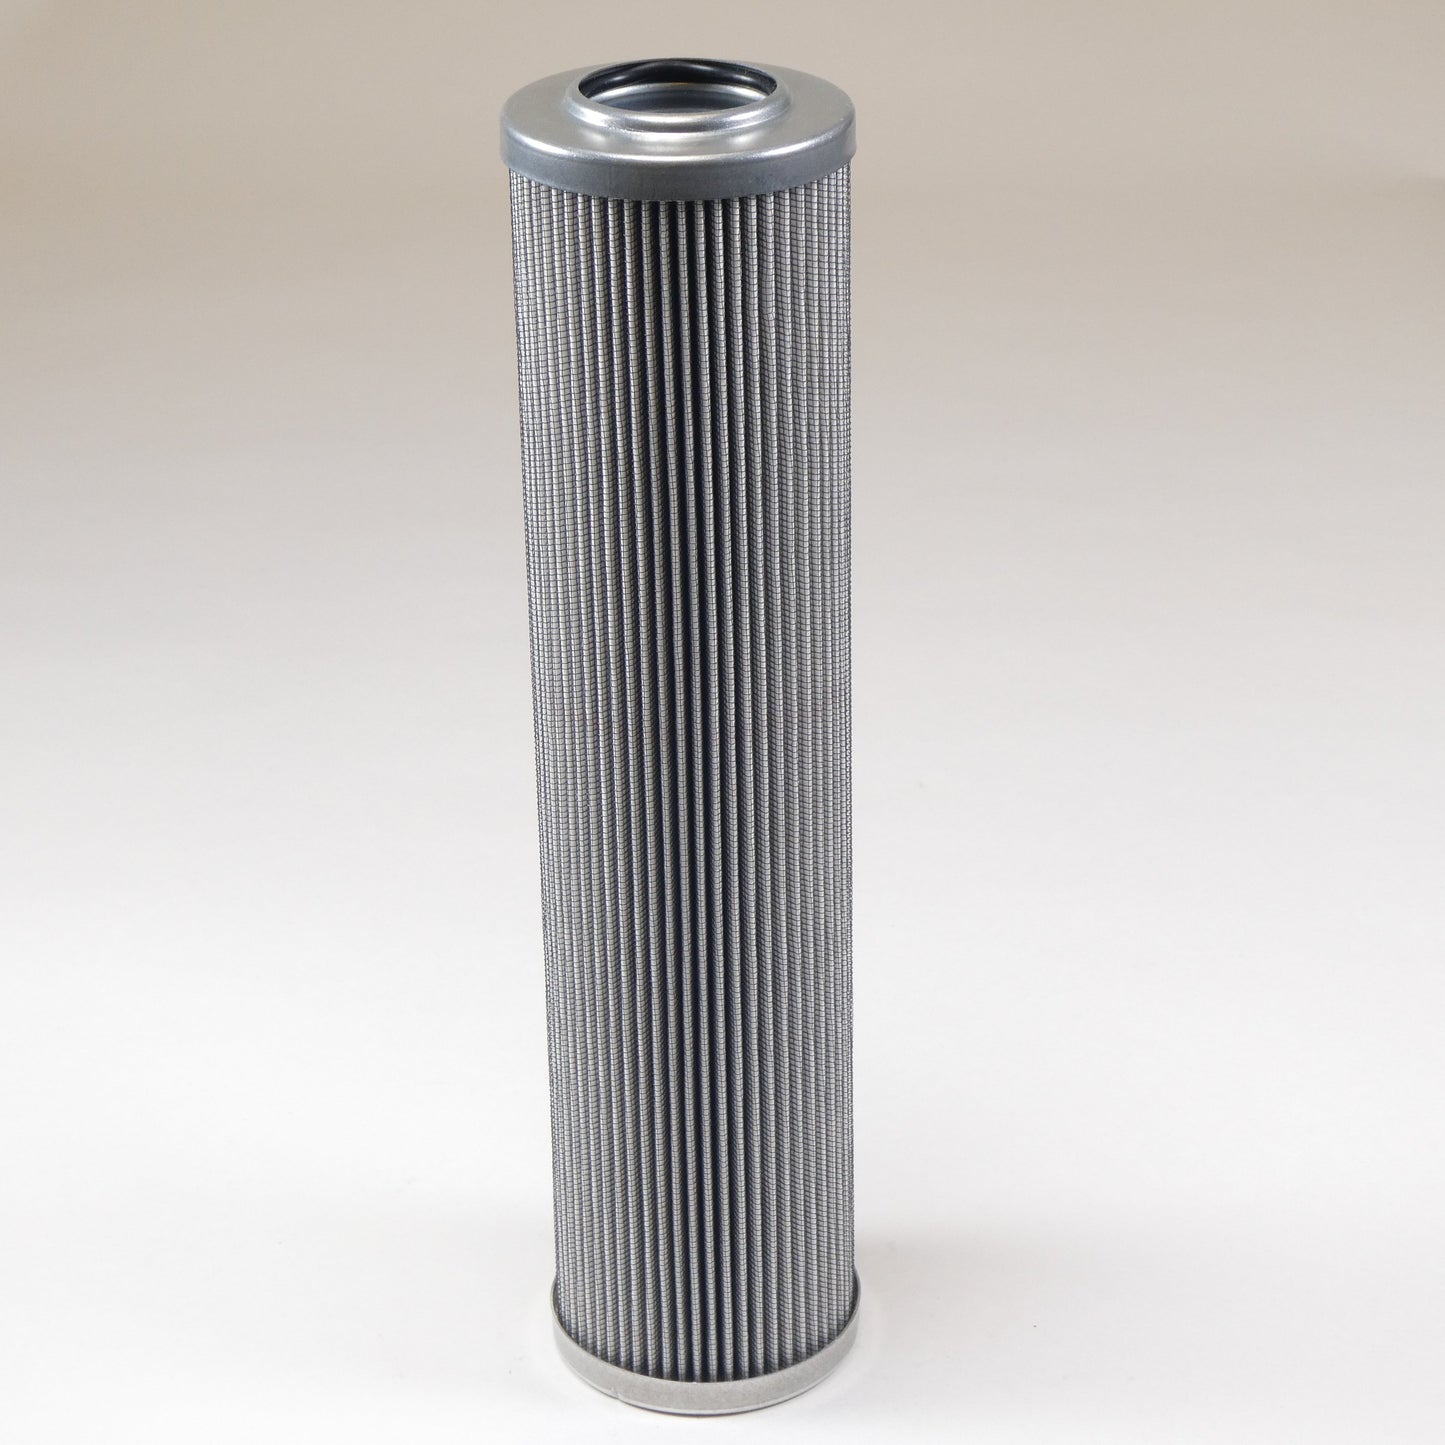 Hydrafil Replacement Filter Element for Hilco 3830-11-098-C